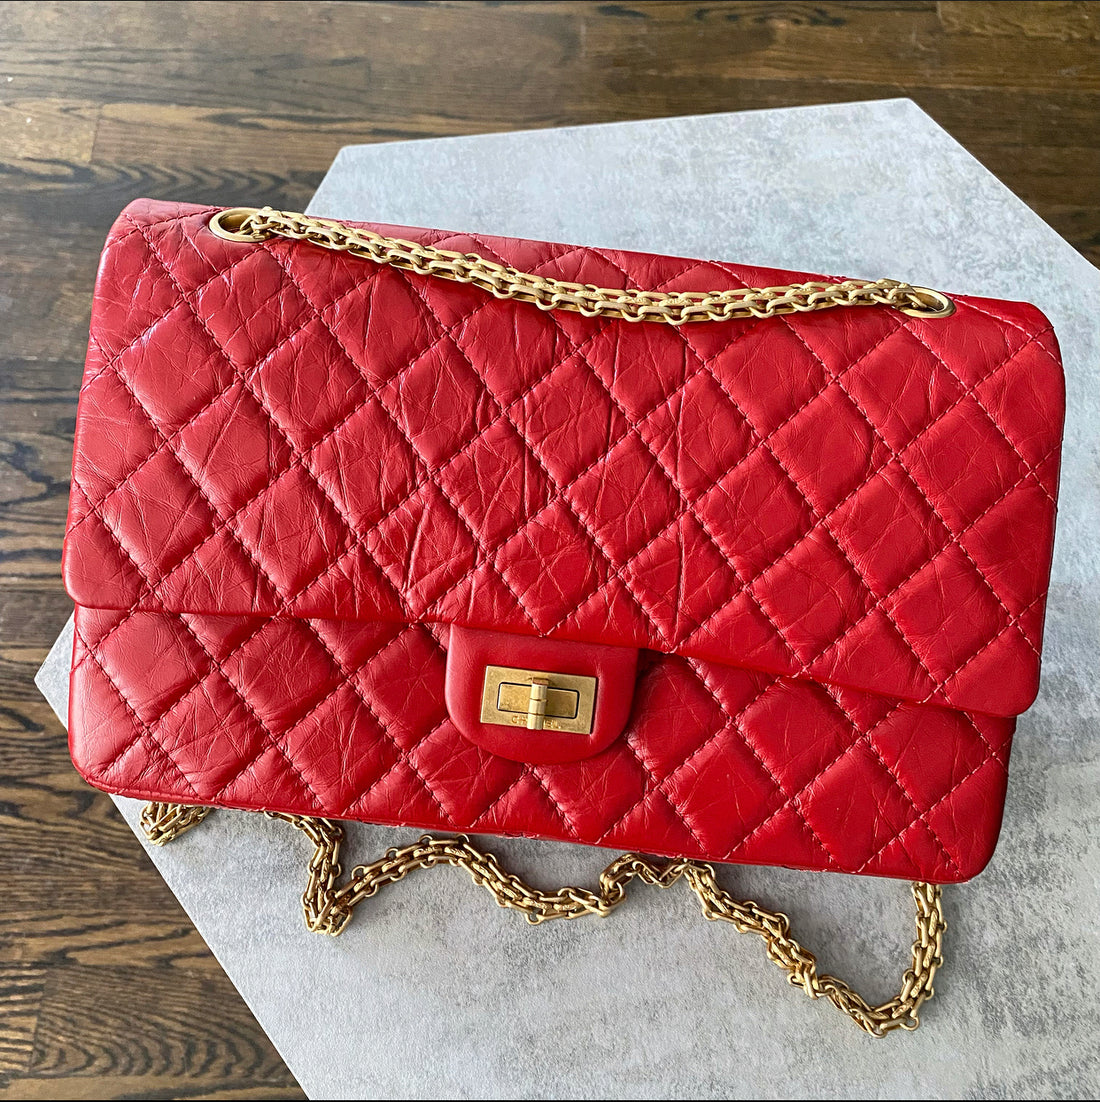 Chanel Red Lambskin Medium-Small Classic 2.55 Double Flap Bag